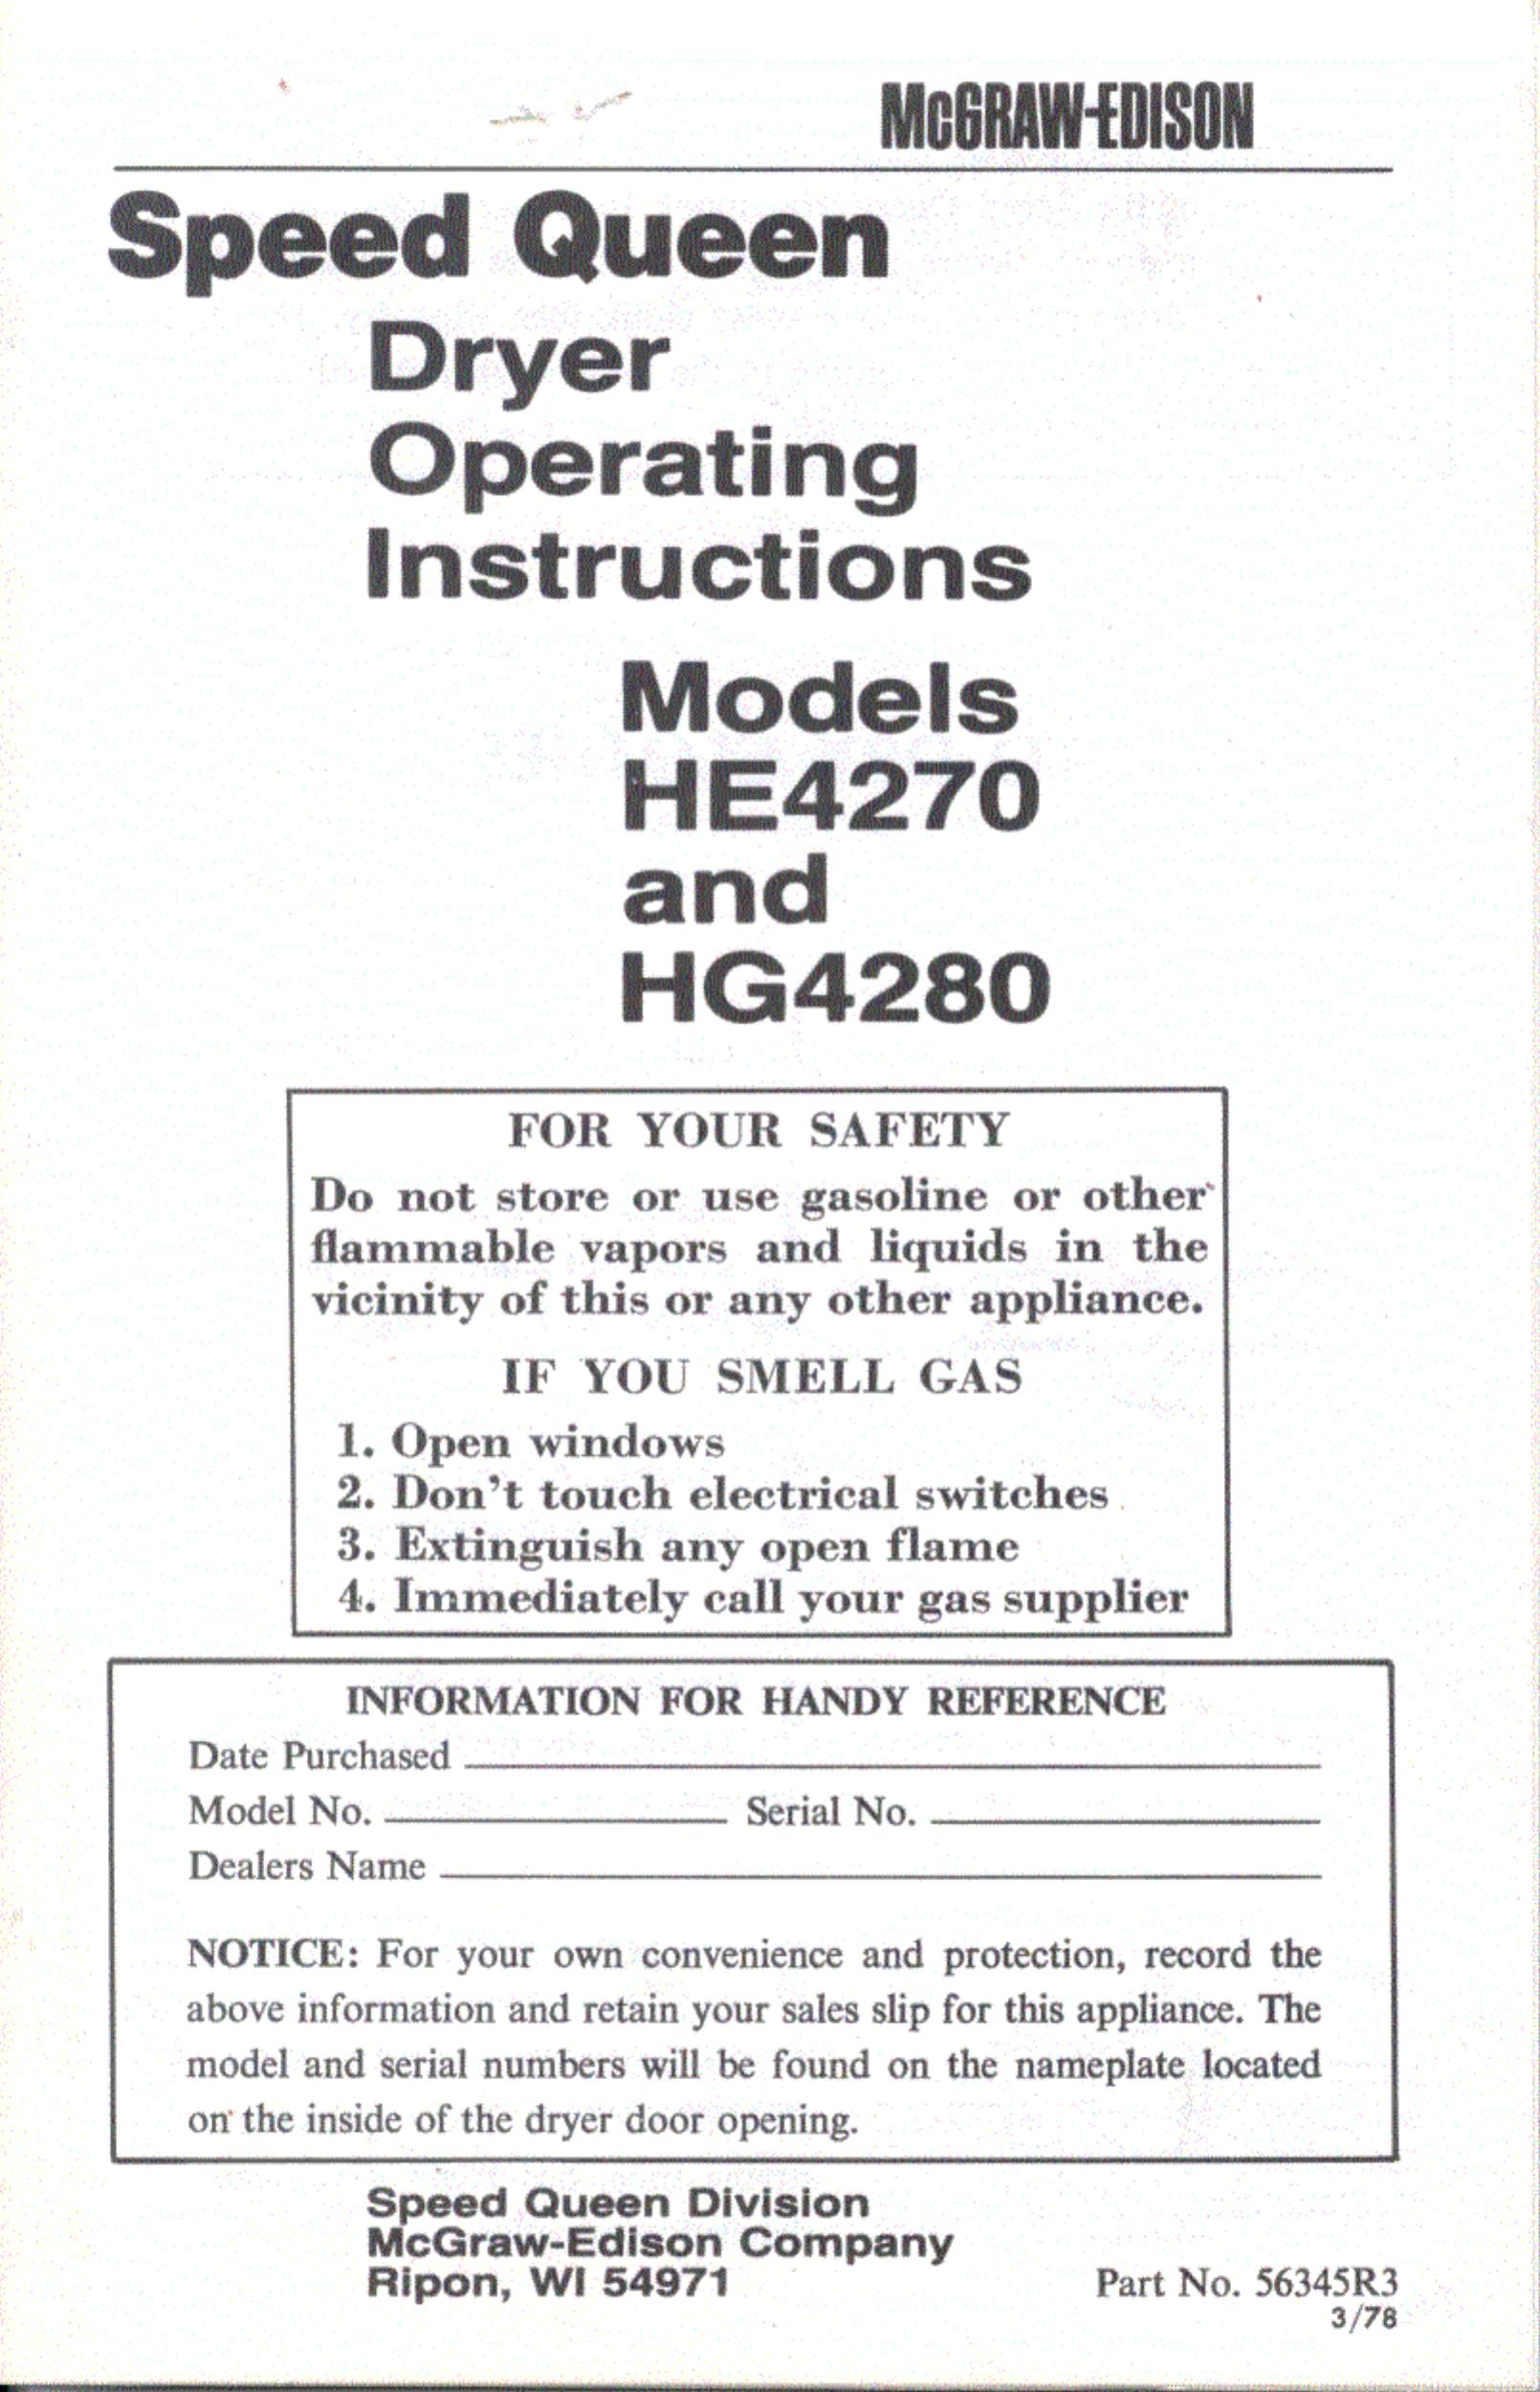 Speed Queen HG4280 Clothes Dryer User Manual